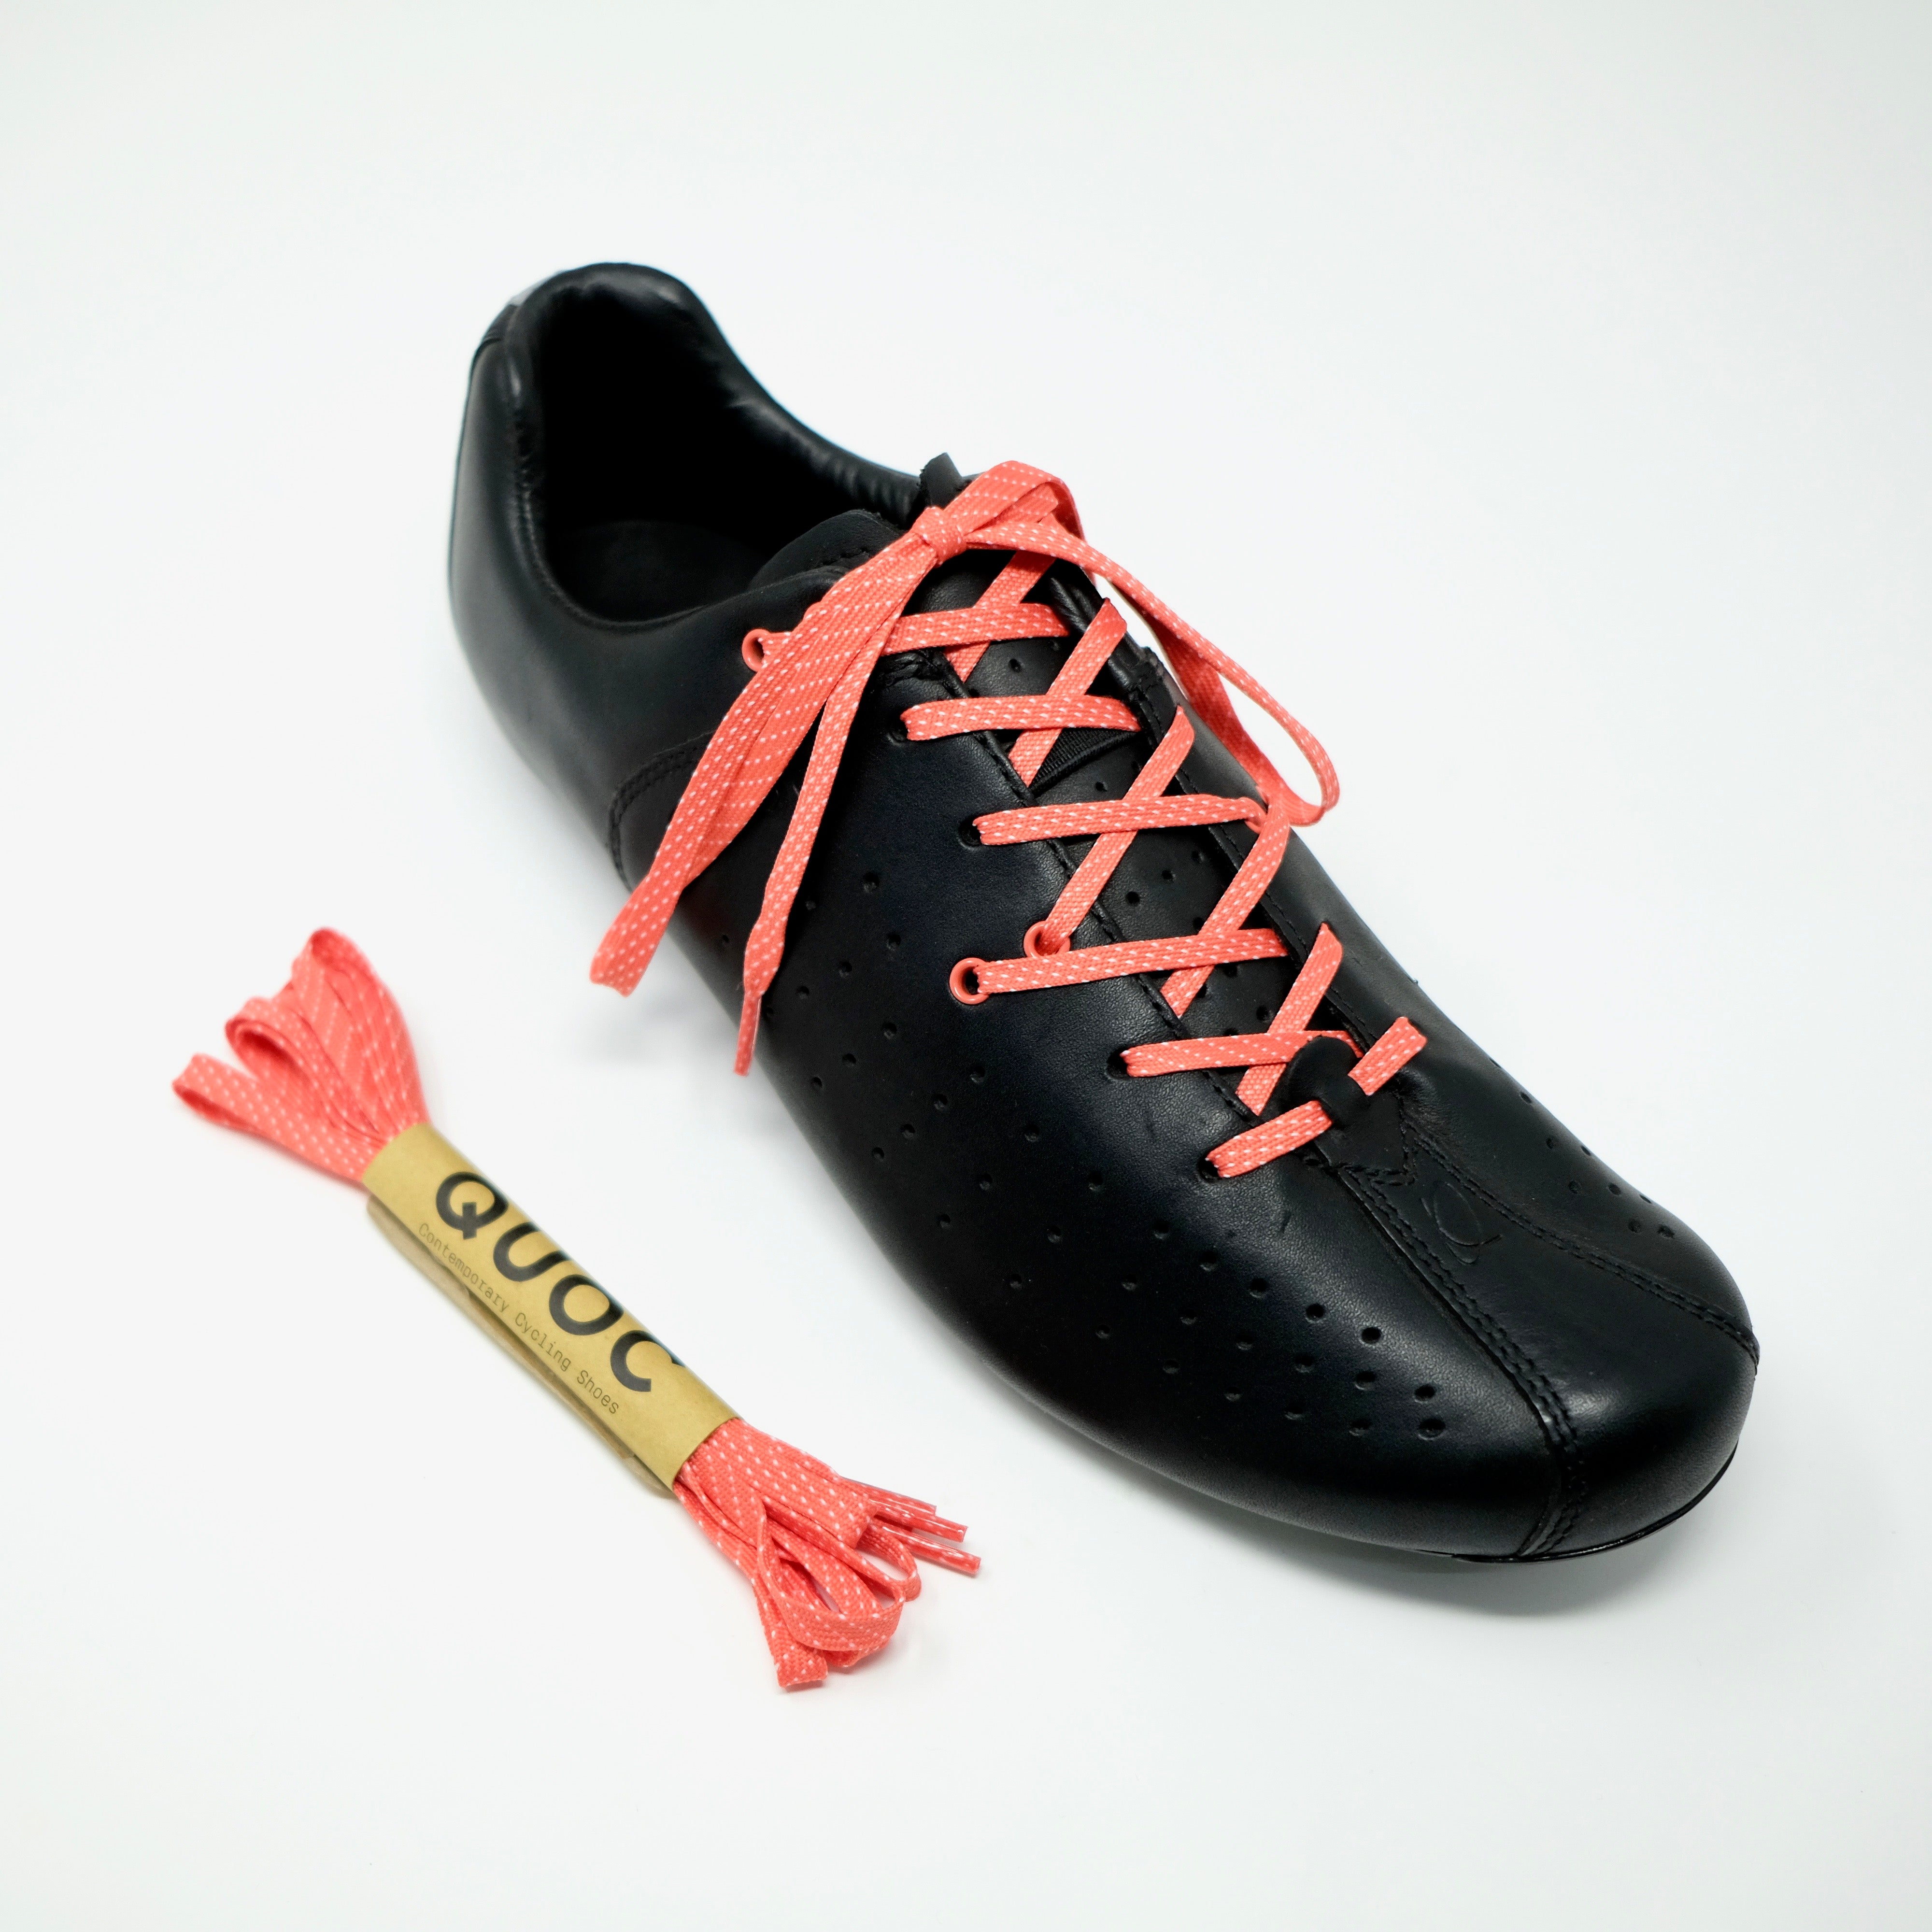 QUOC Candy Shoelace